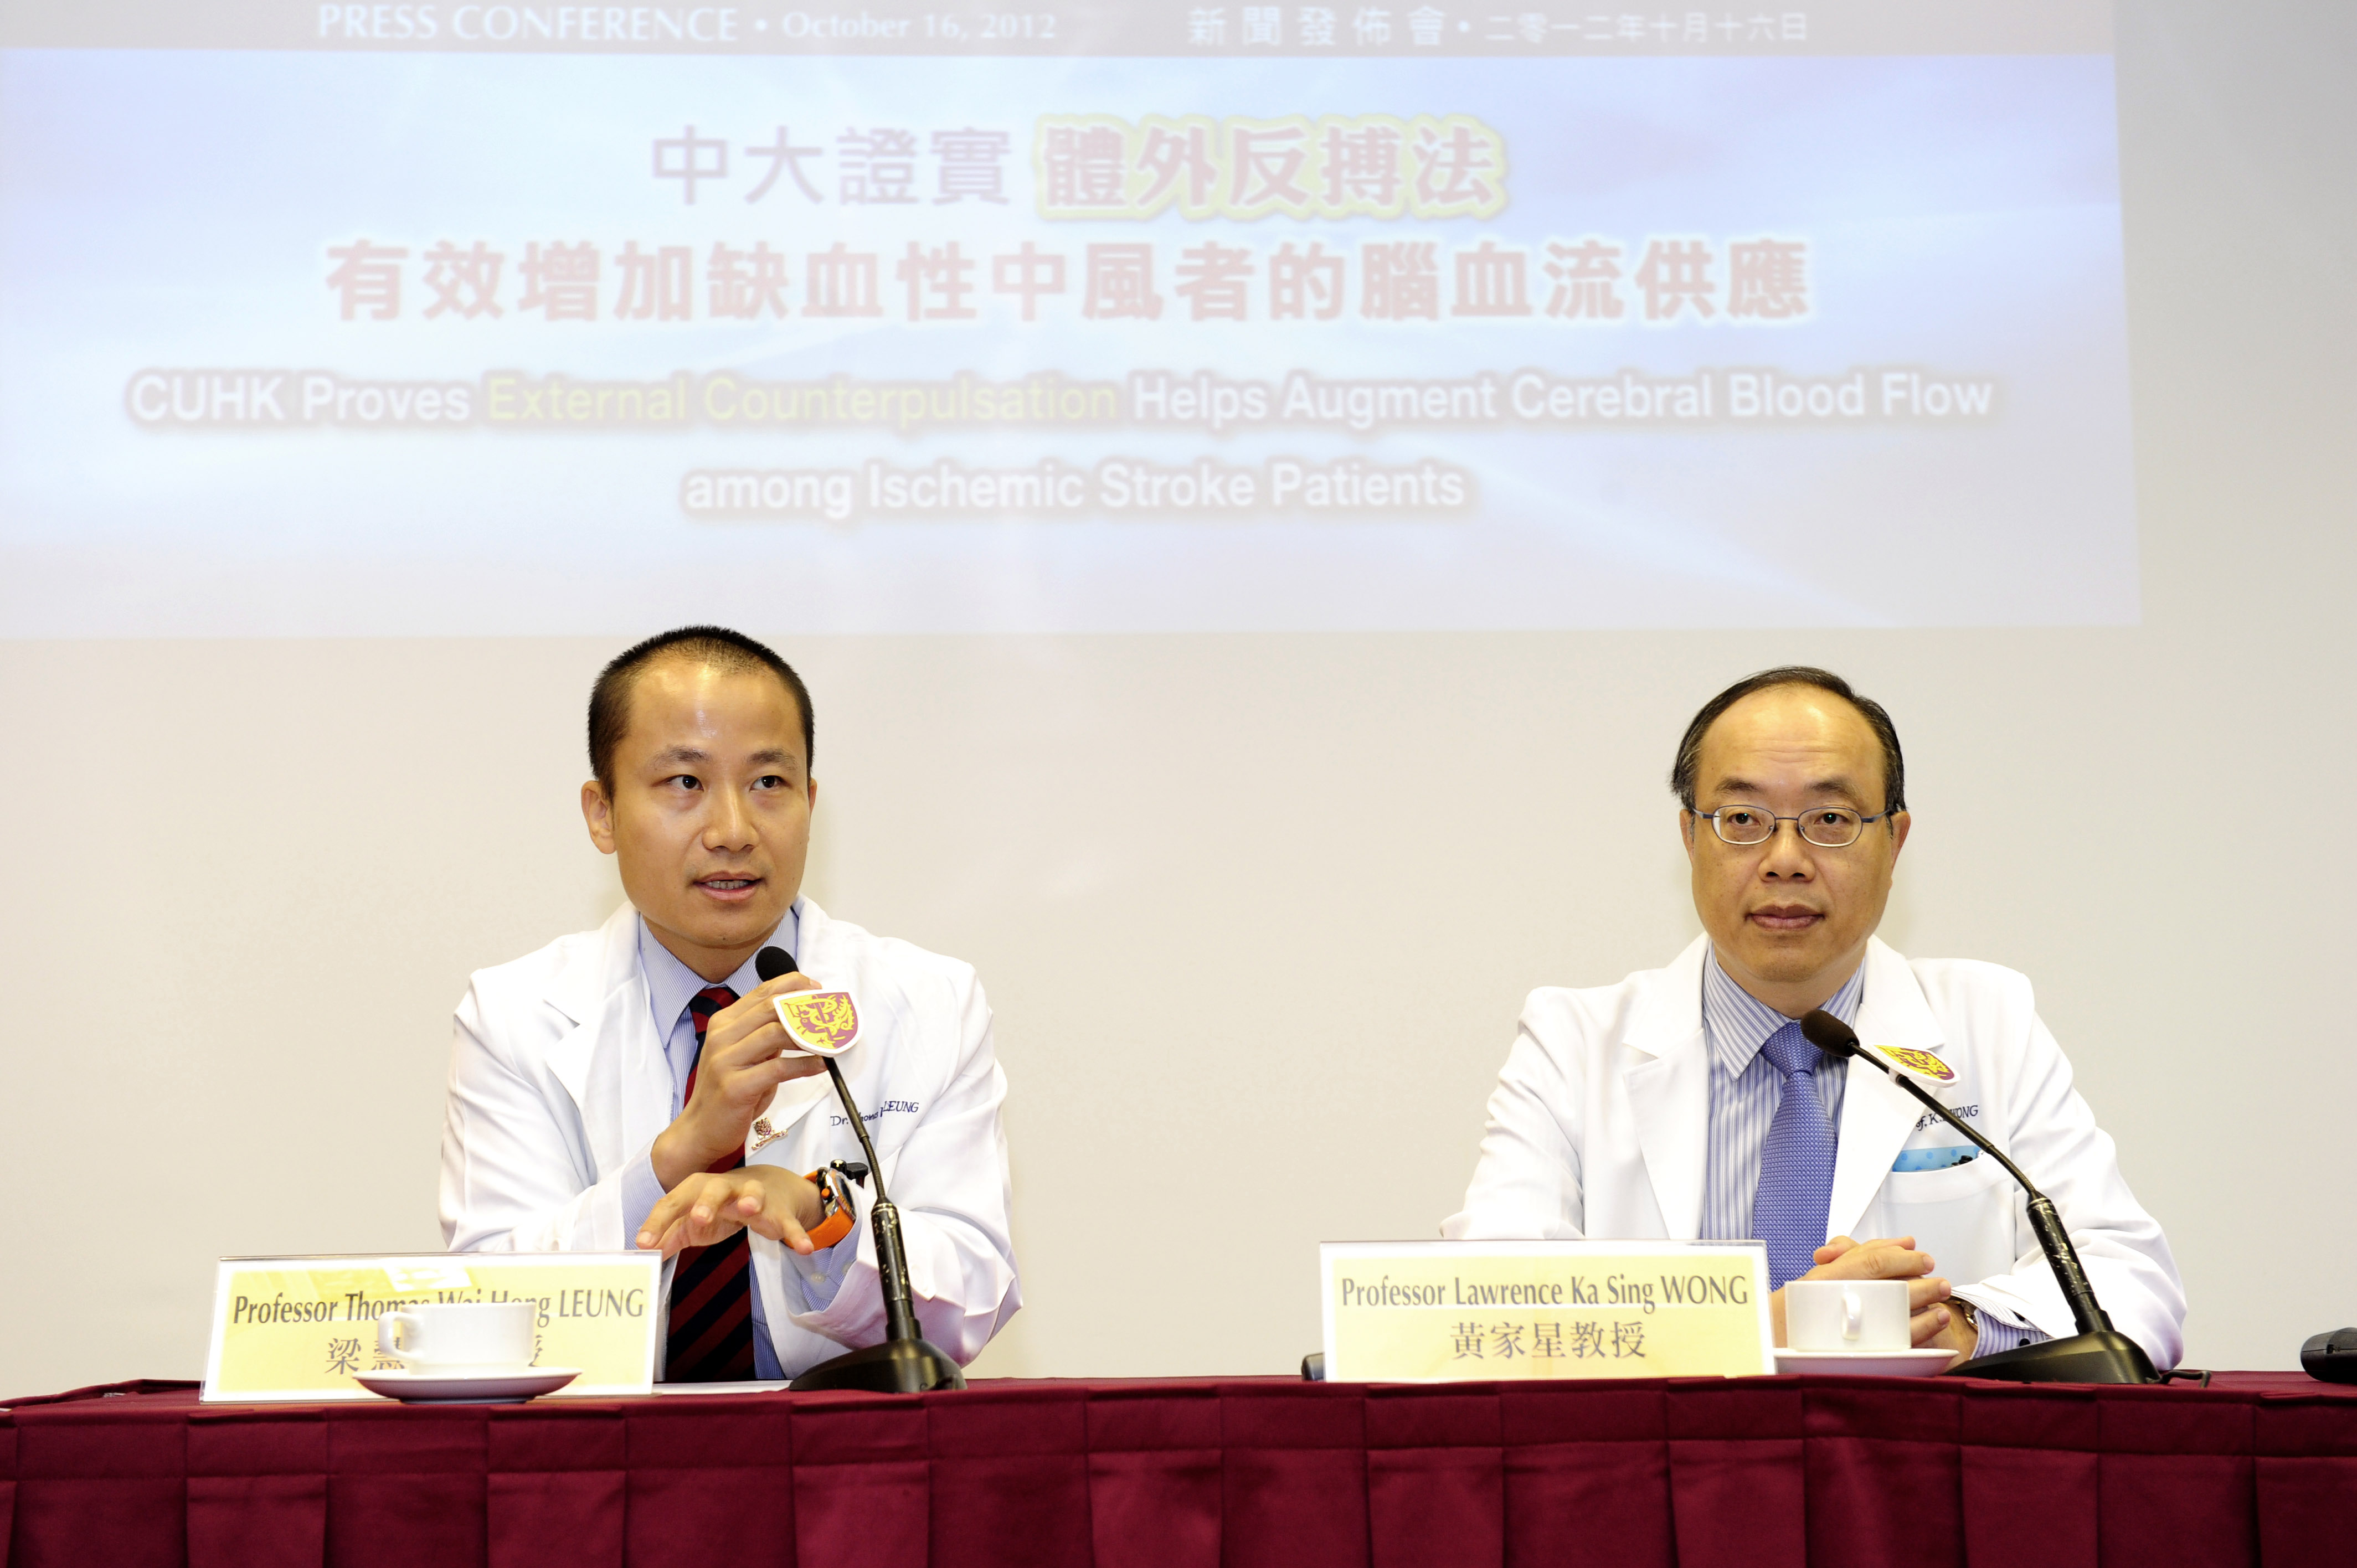 (From Left): Professor Thomas Wai Hong LEUNG, Associate Professor, Division of Neurology, Department of Medicine and Therapeutics; and Professor Lawrence Ka Sing WONG, Mok Hing Yiu Professor of Medicine, Head of Division, Division of Neurology, Department of Medicine and Therapeutics, CUHK, jointly present their recent research on how external counterpulsation helps improving cerebral blood flow among ischemic stroke patients